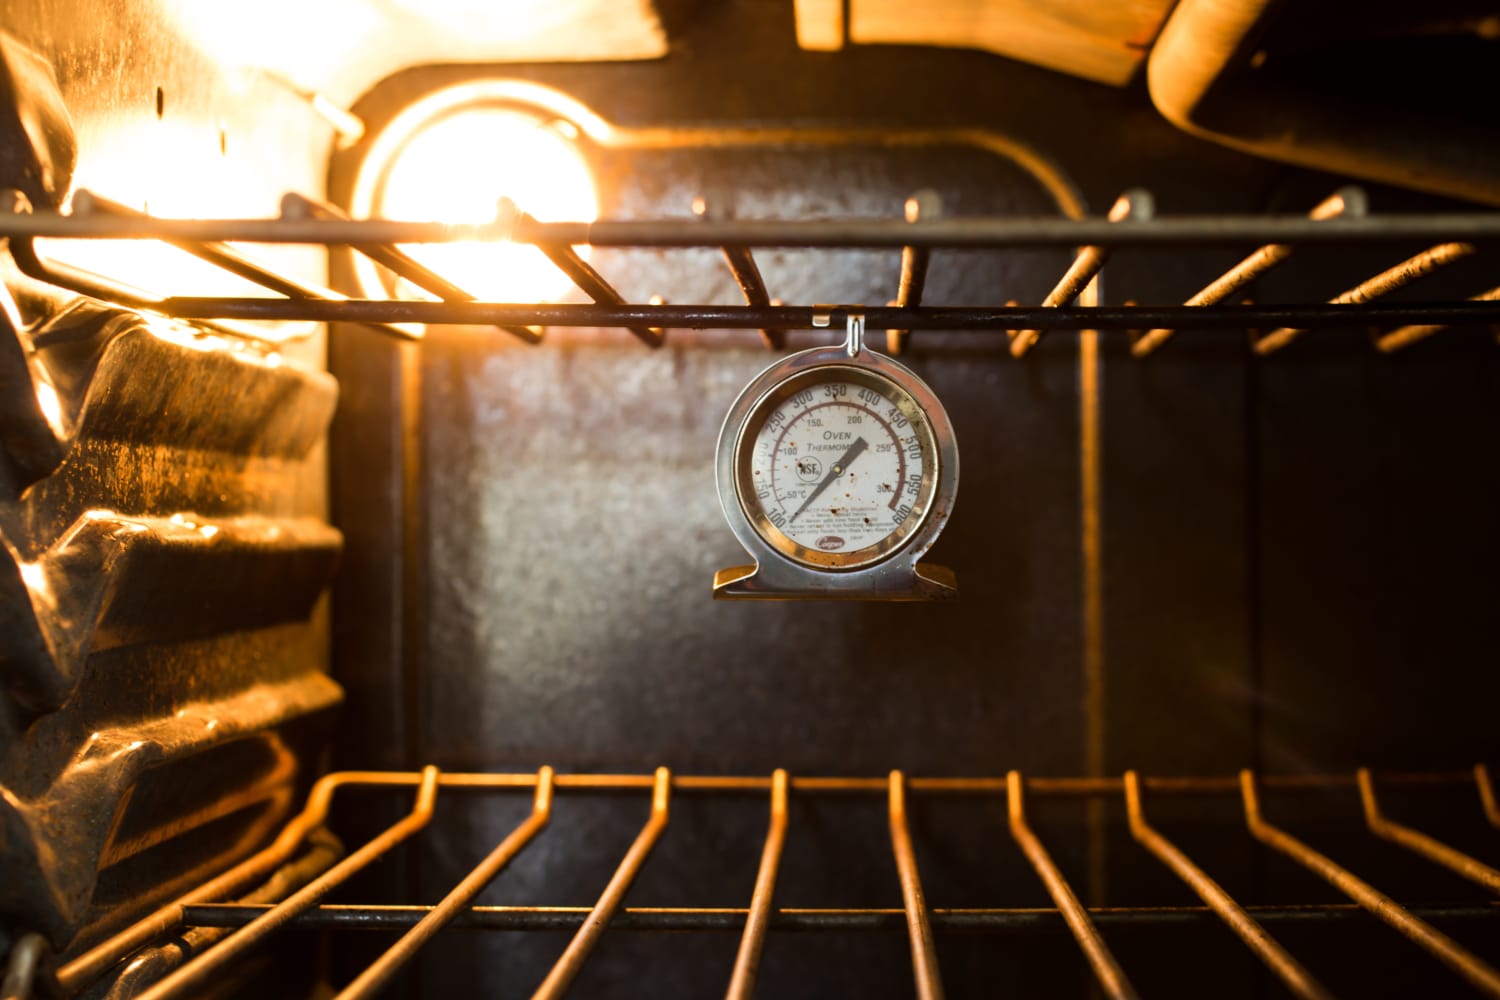 Why You Should Use an Oven Thermometer When Baking - The Baker's Almanac